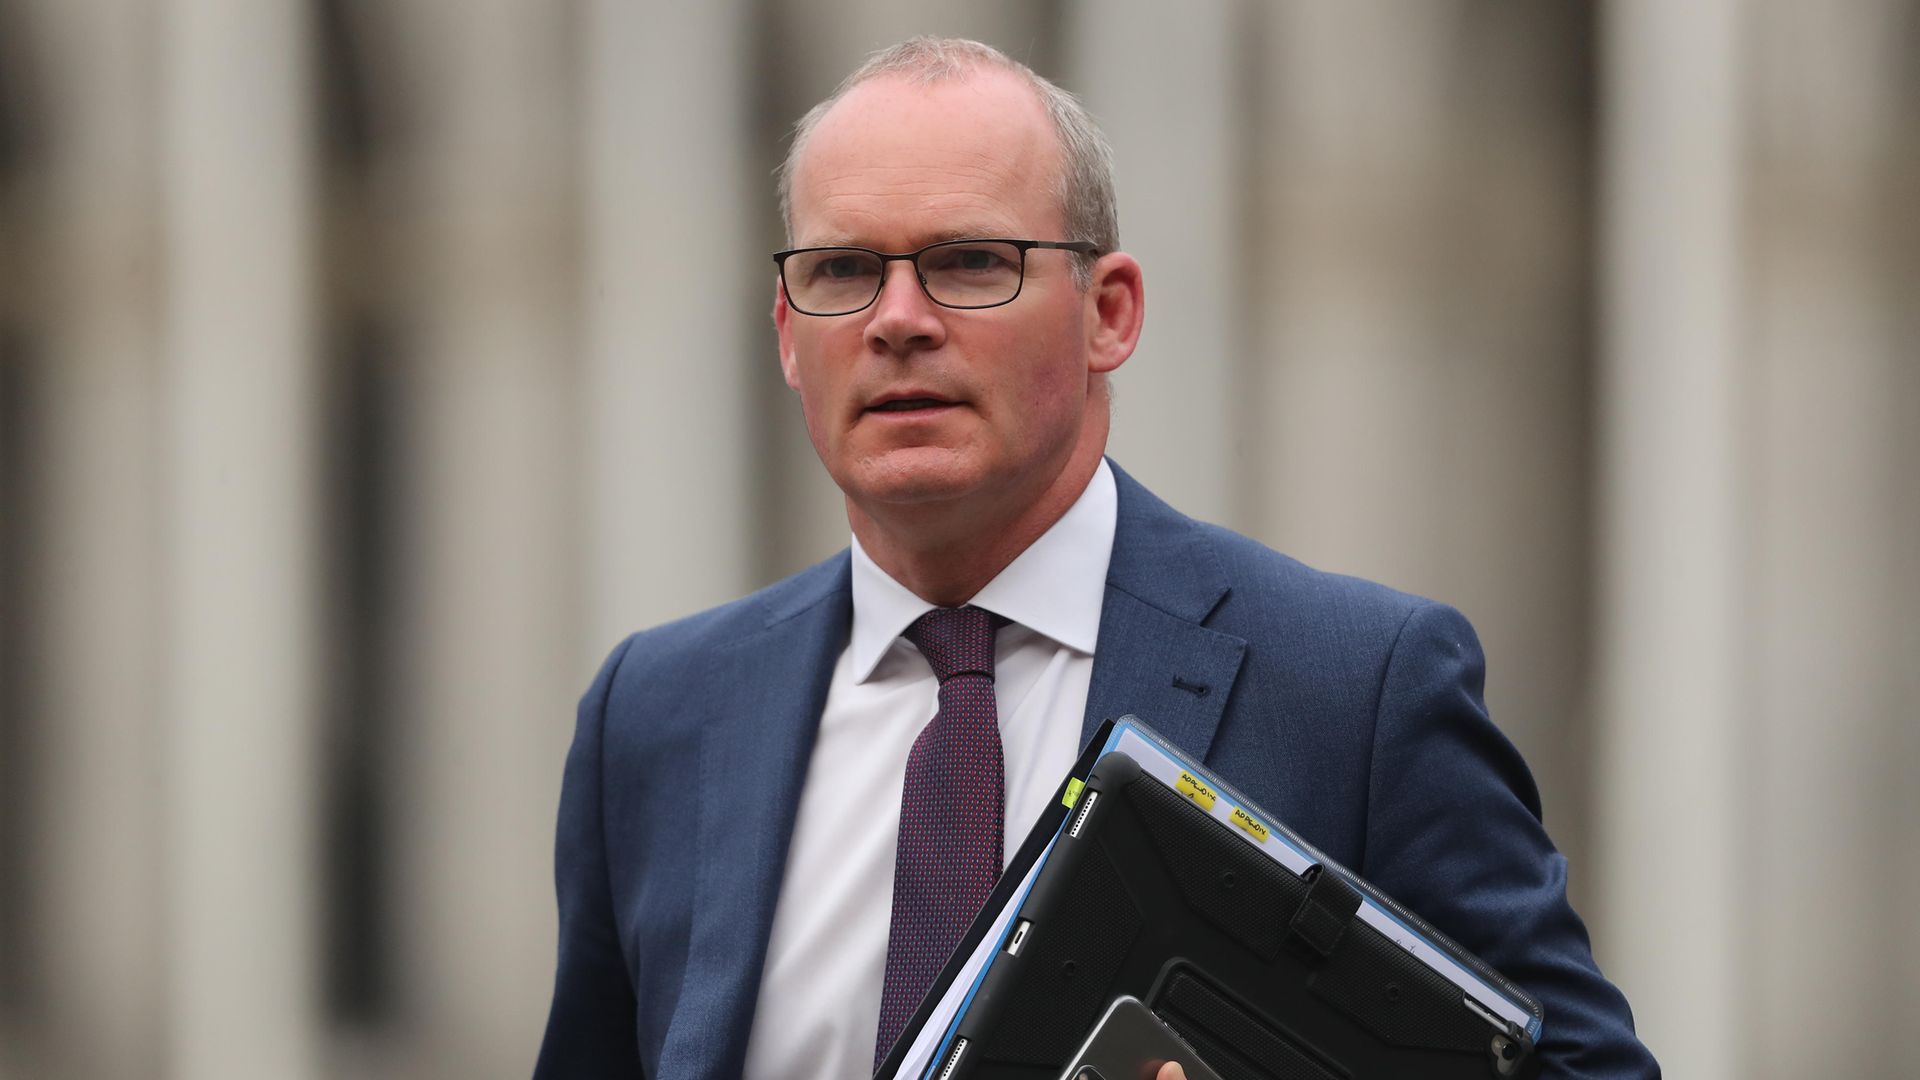 Minister for foreign affairs and defence Simon Coveney arrives at Dublin Castle for a cabinet meeting - Credit: PA